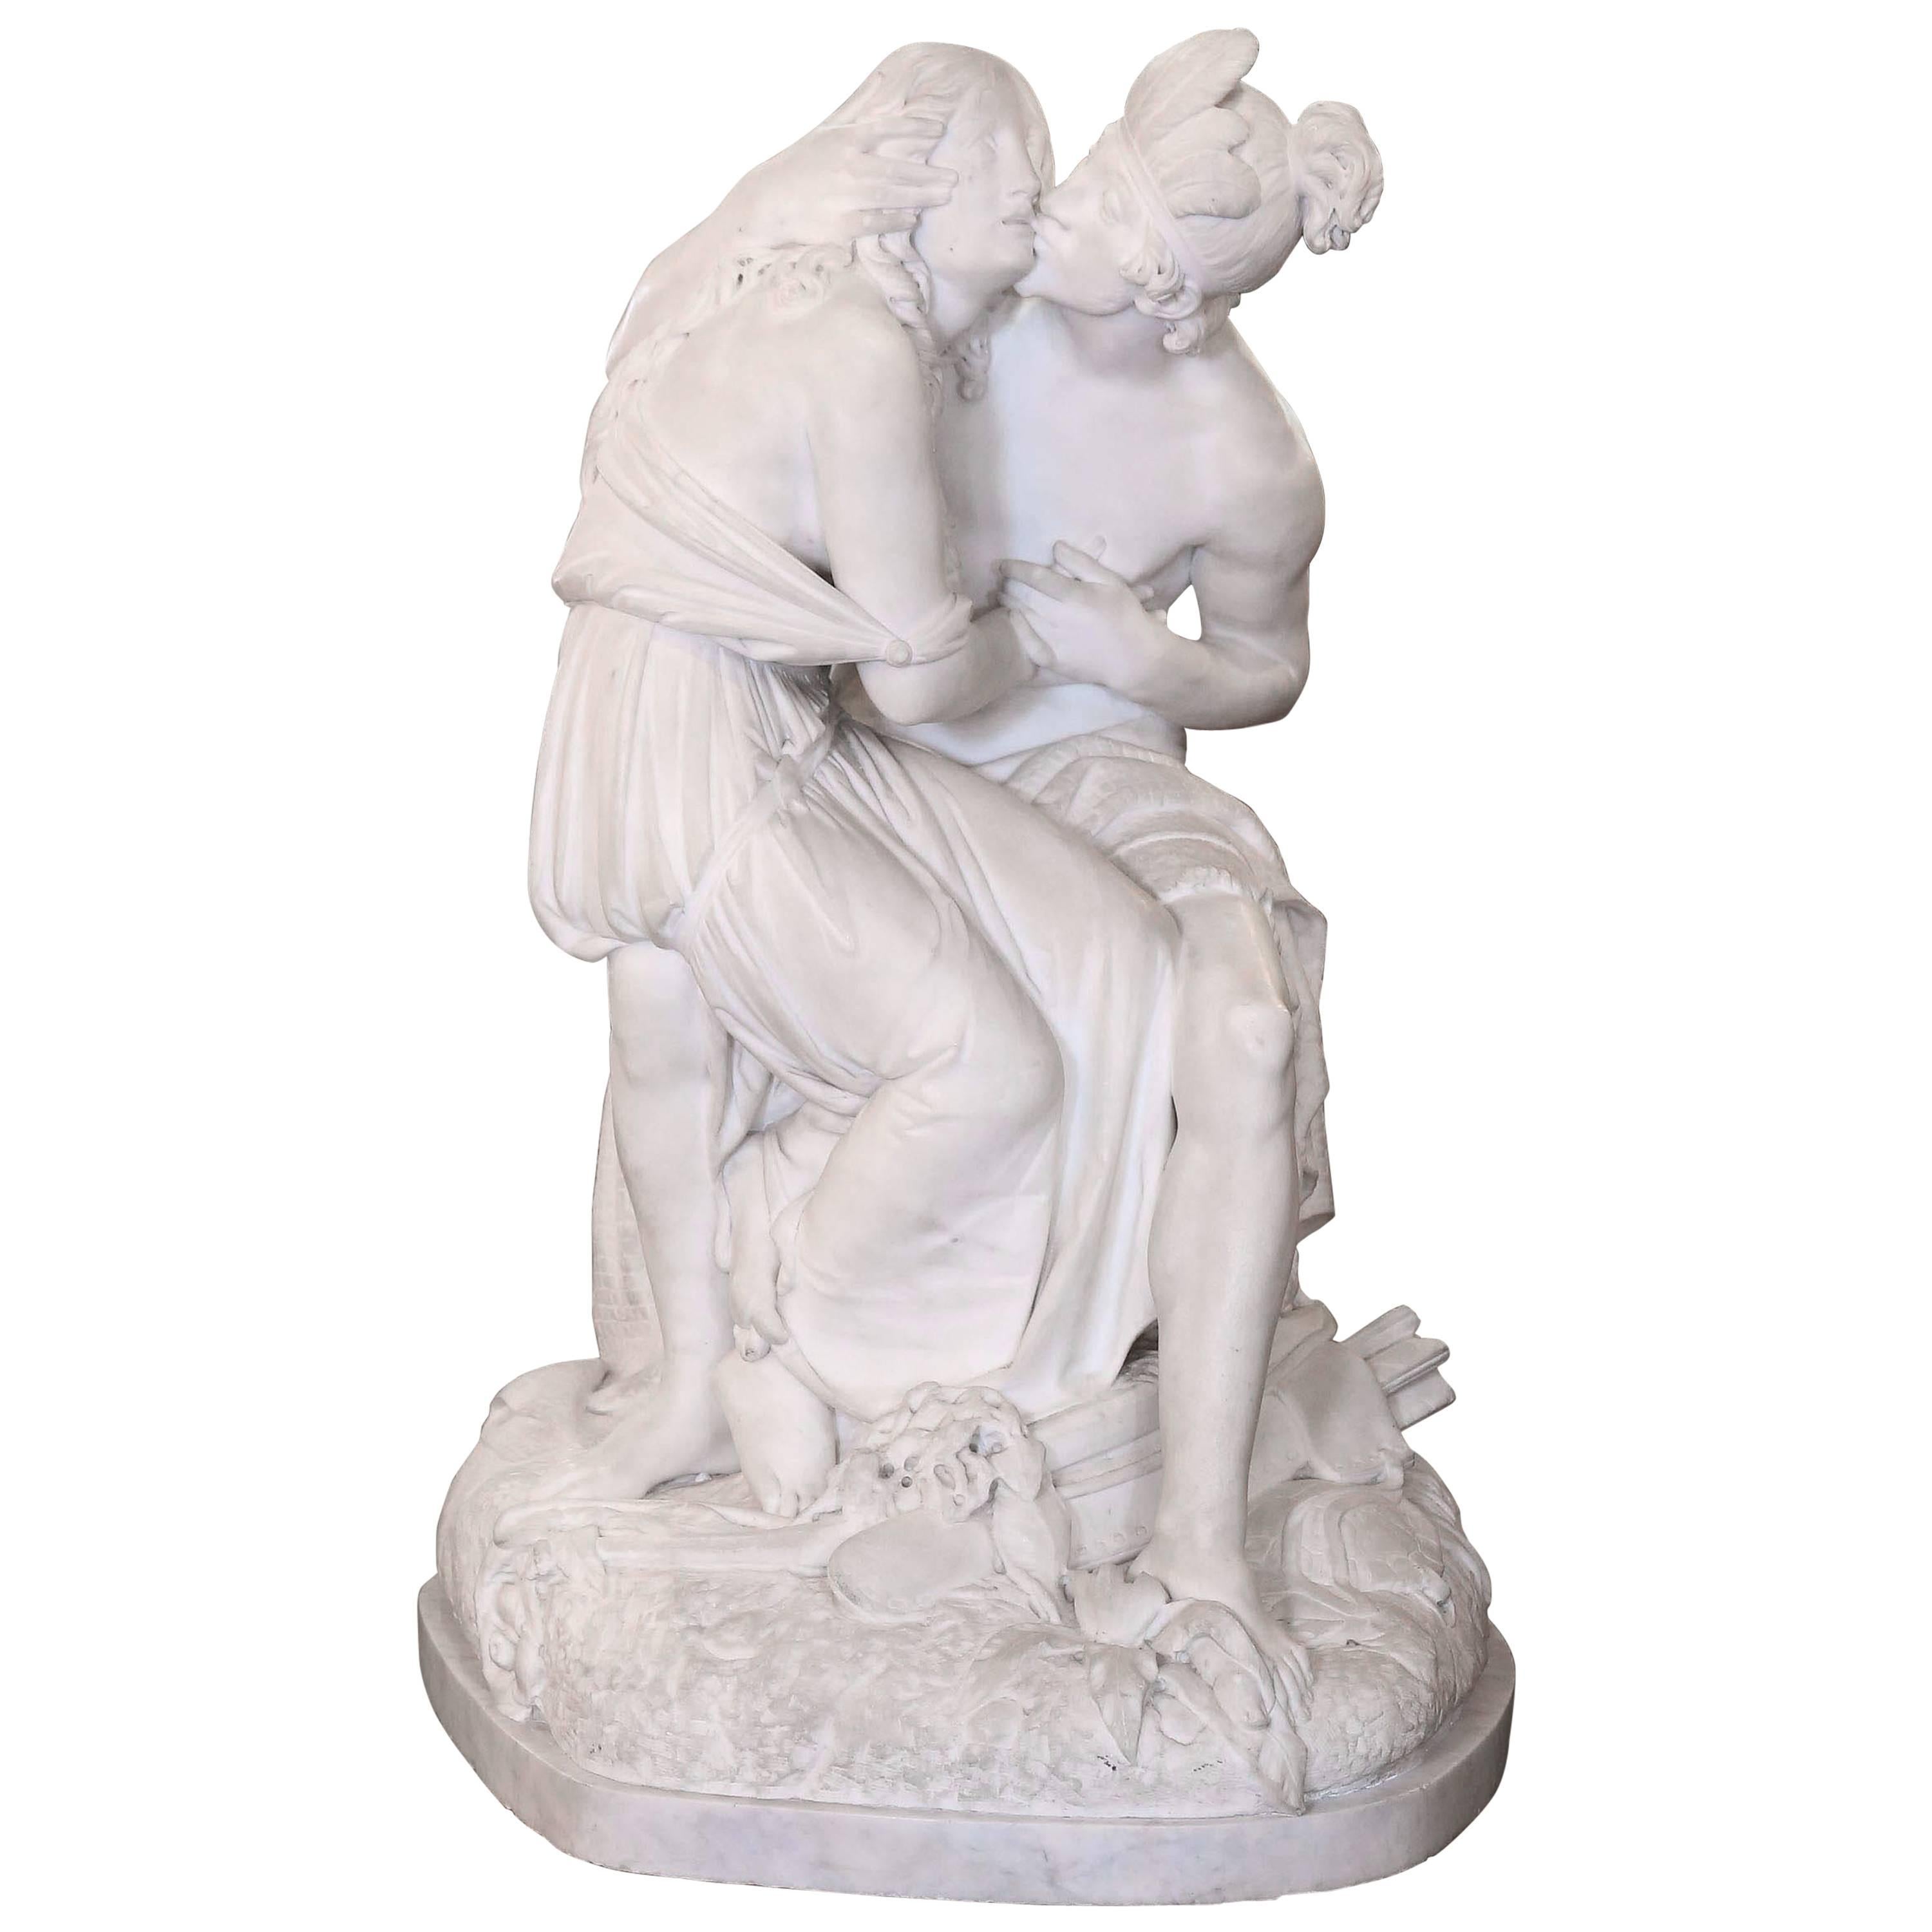 Large-Scale Marble Sculpture of Two Figures Embracing by the Sculptor Turini